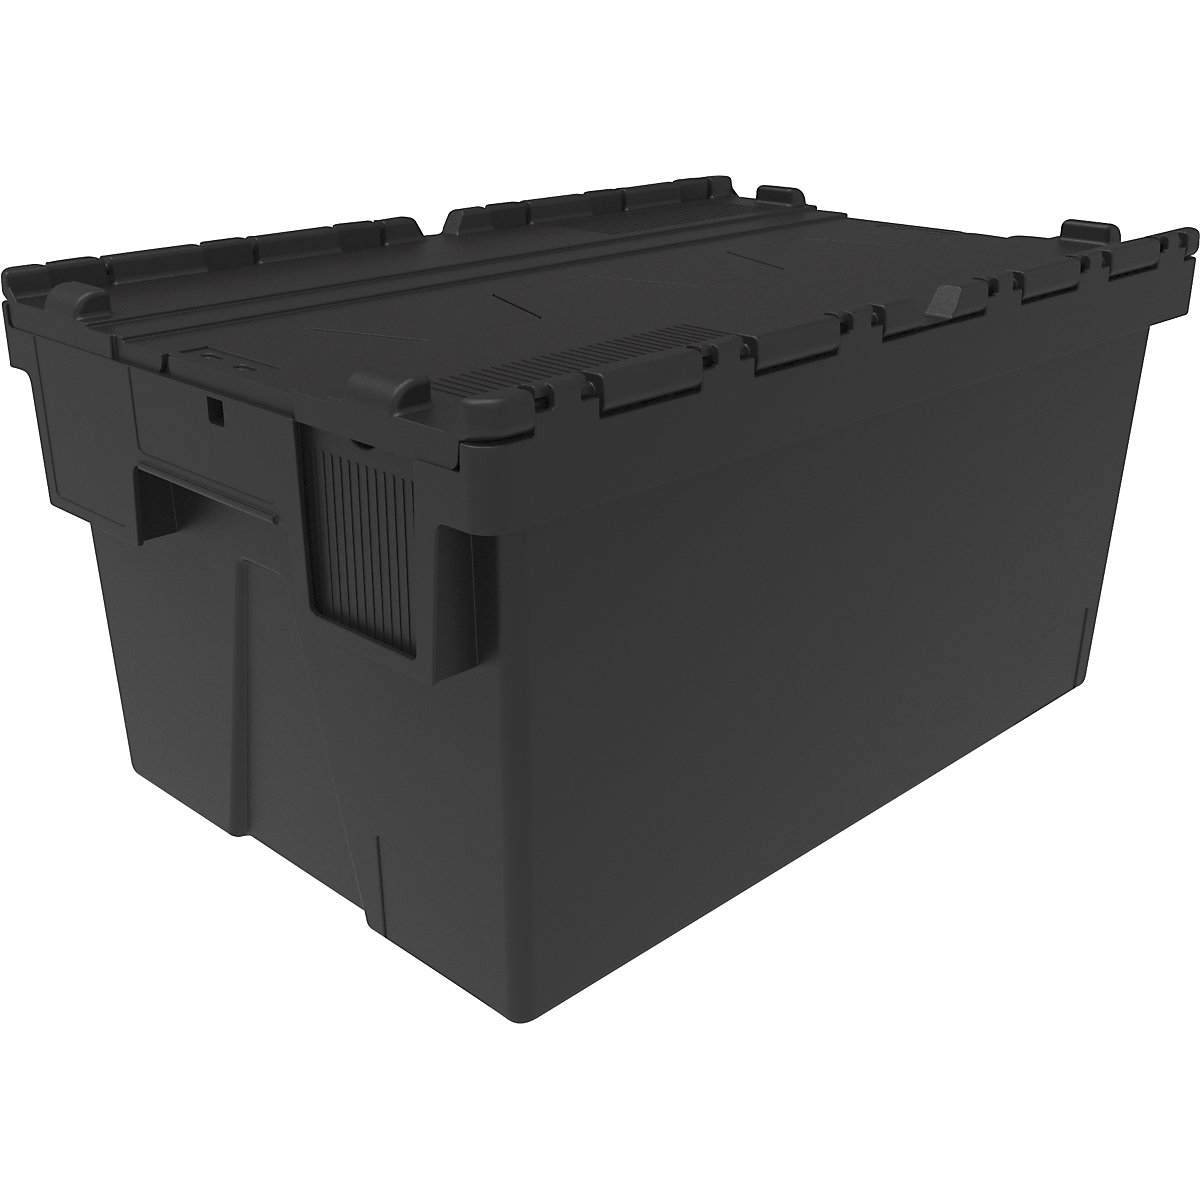 Reusable stacking container, LxWxH 600 x 400 x 310 mm, black-5